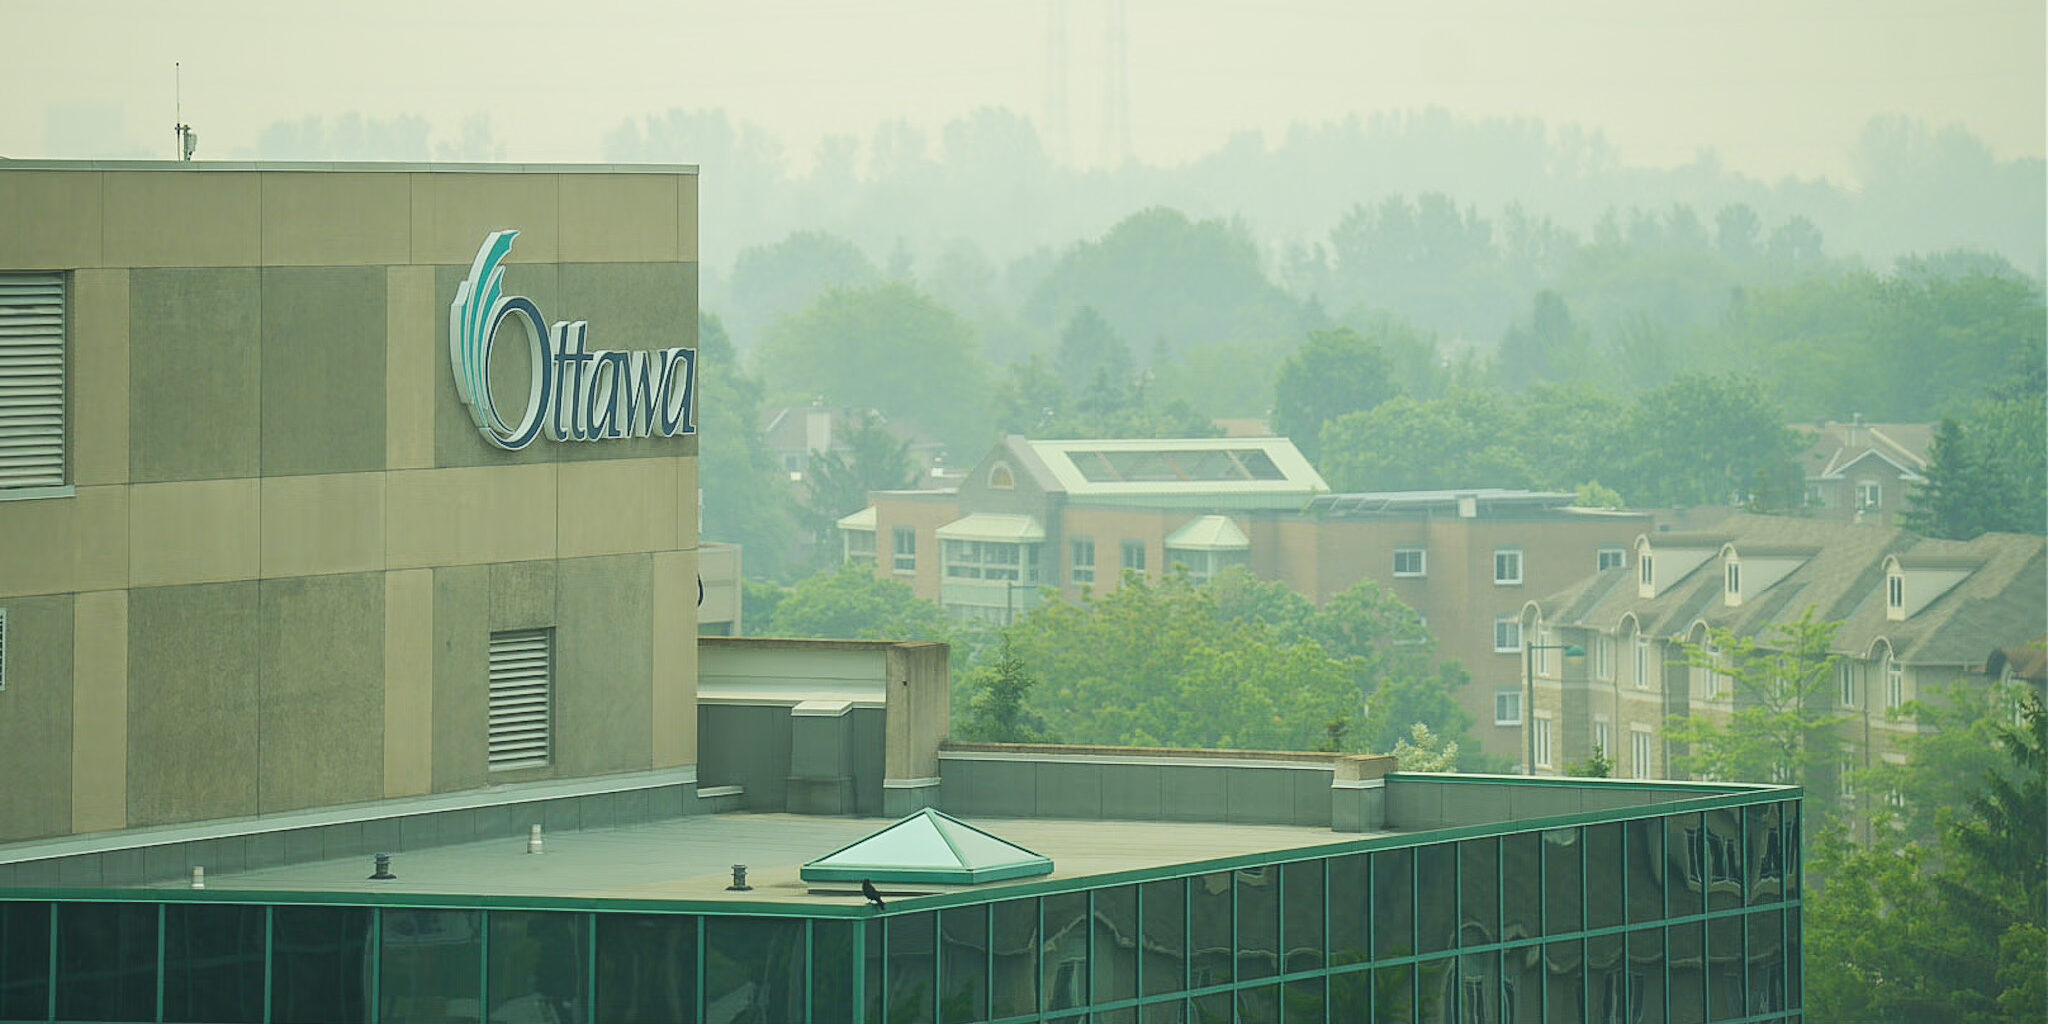 A smokey haze hangs over the City of Ottawa due to regional forest fires.